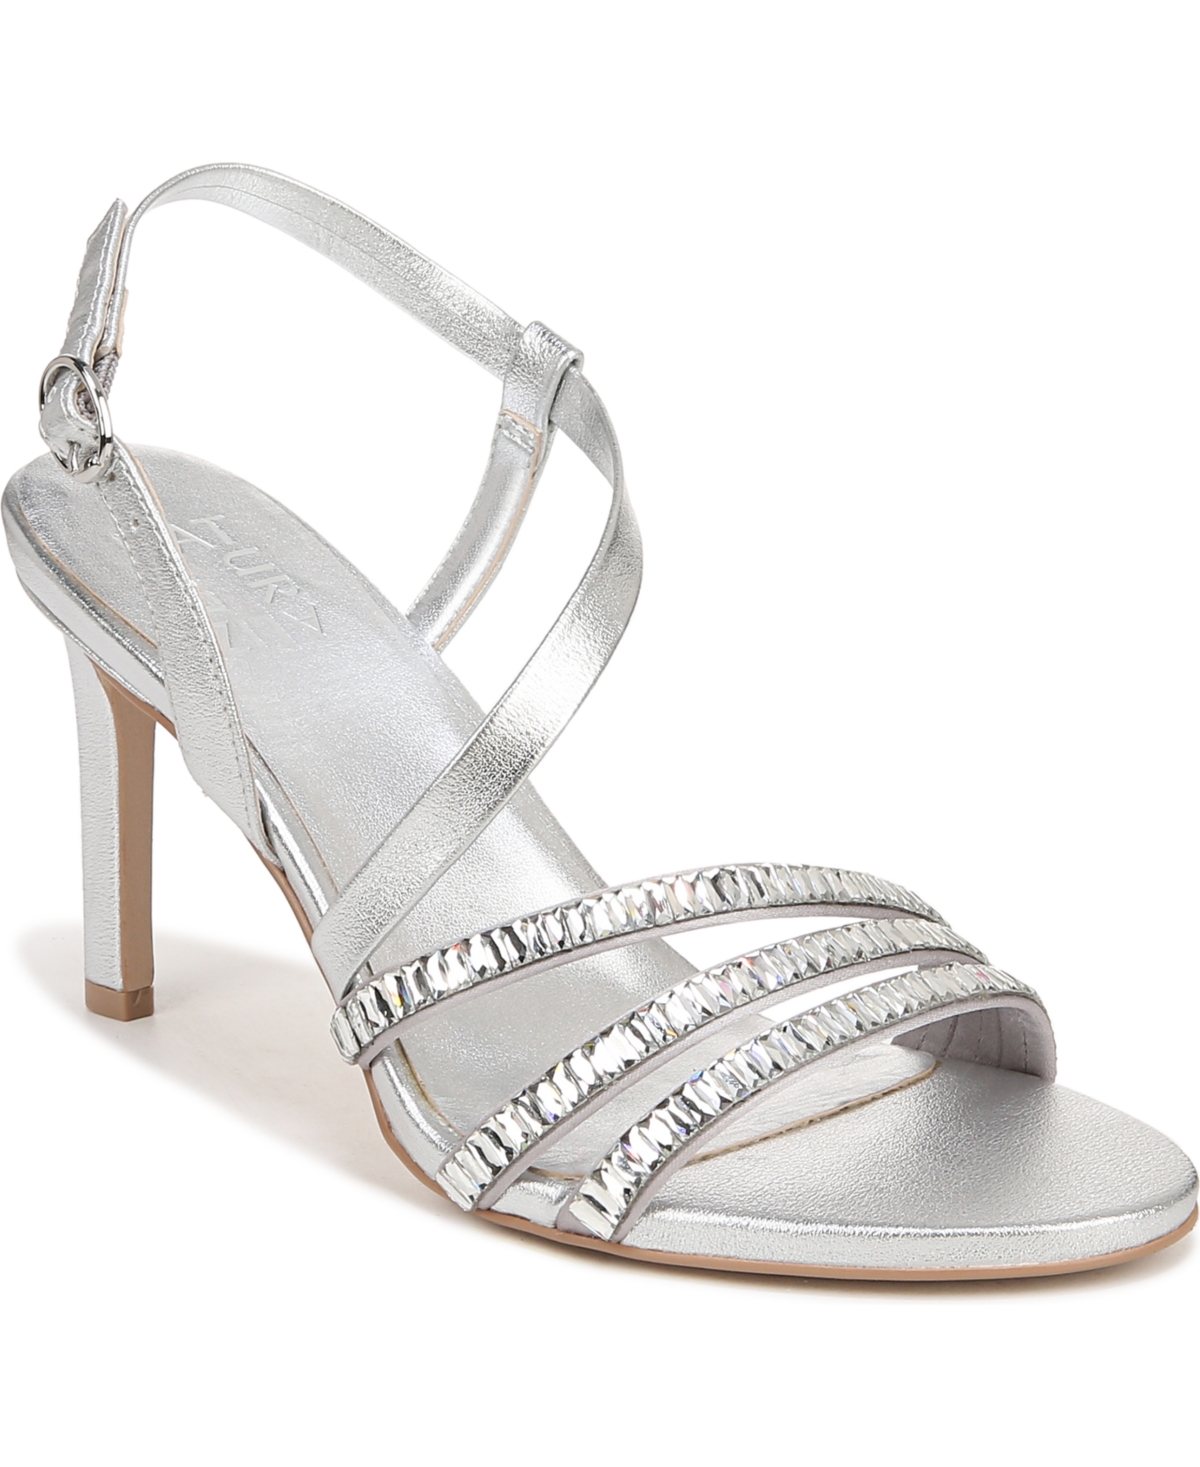 Shop Naturalizer Kimberly 2 Strappy Dress Sandals In Silver Satin,stones